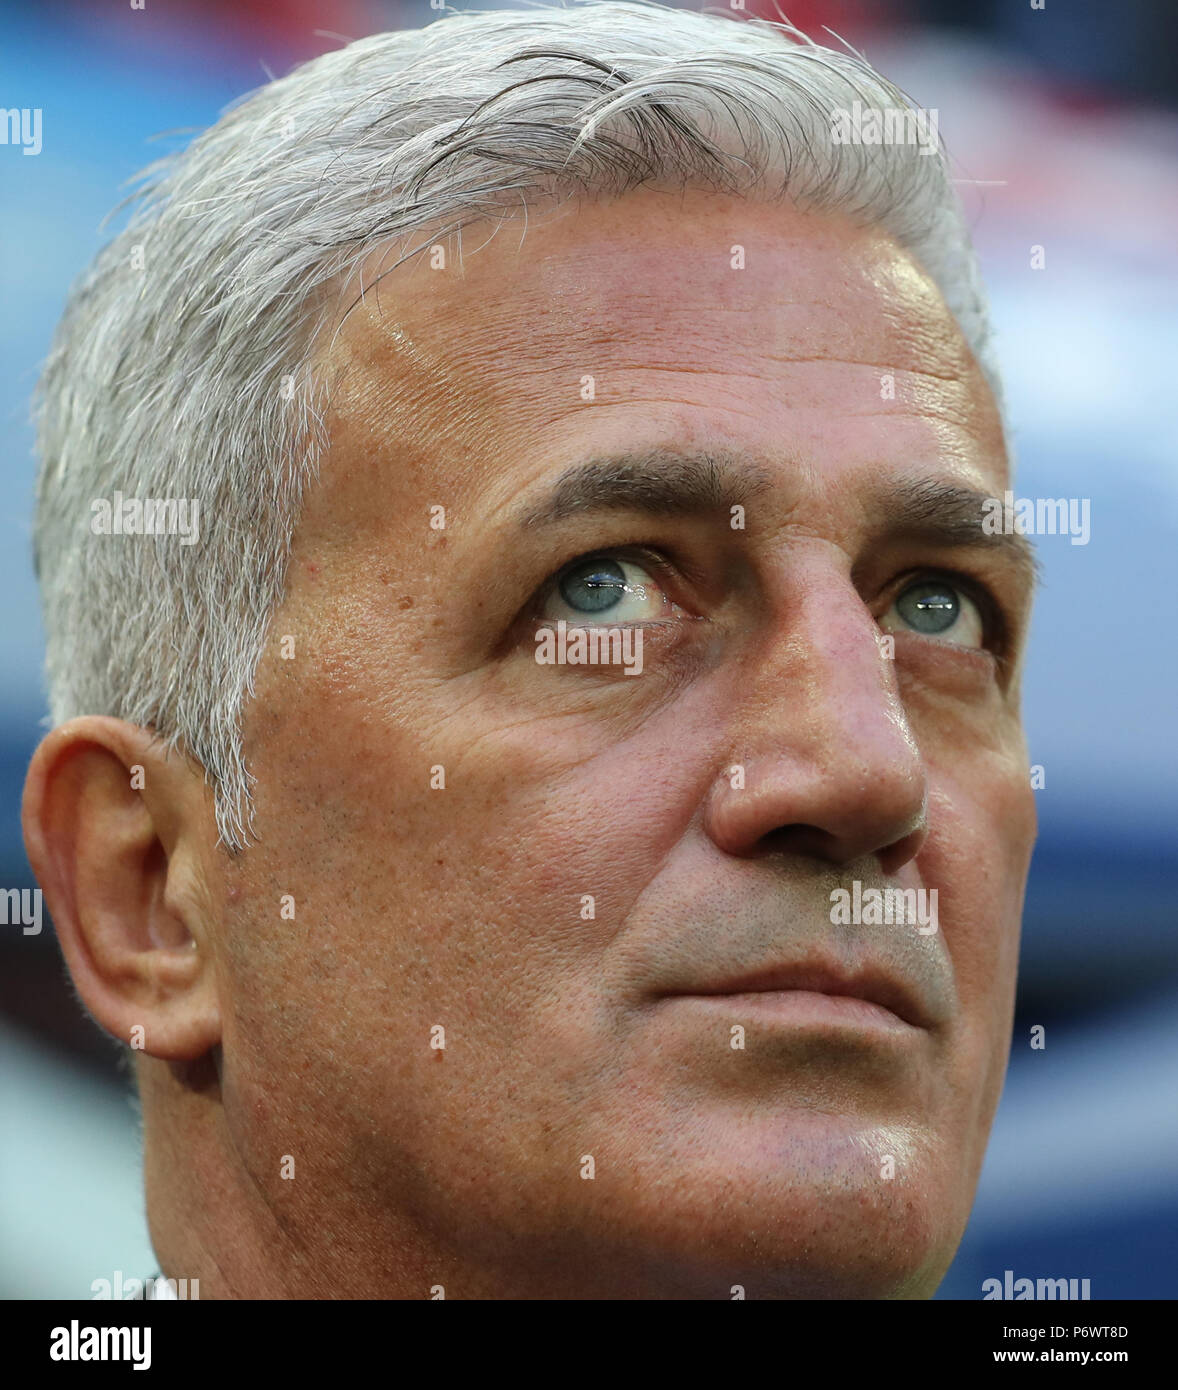 Saint Petersburg, Russia. 3rd July, 2018. Head coach Vladimir Petkovic of Switzerland is seen prior to the 2018 FIFA World Cup round of 16 match between Switzerland and Sweden in Saint Petersburg, Russia, July 3, 2018. Credit: Yang Lei/Xinhua/Alamy Live News Stock Photo